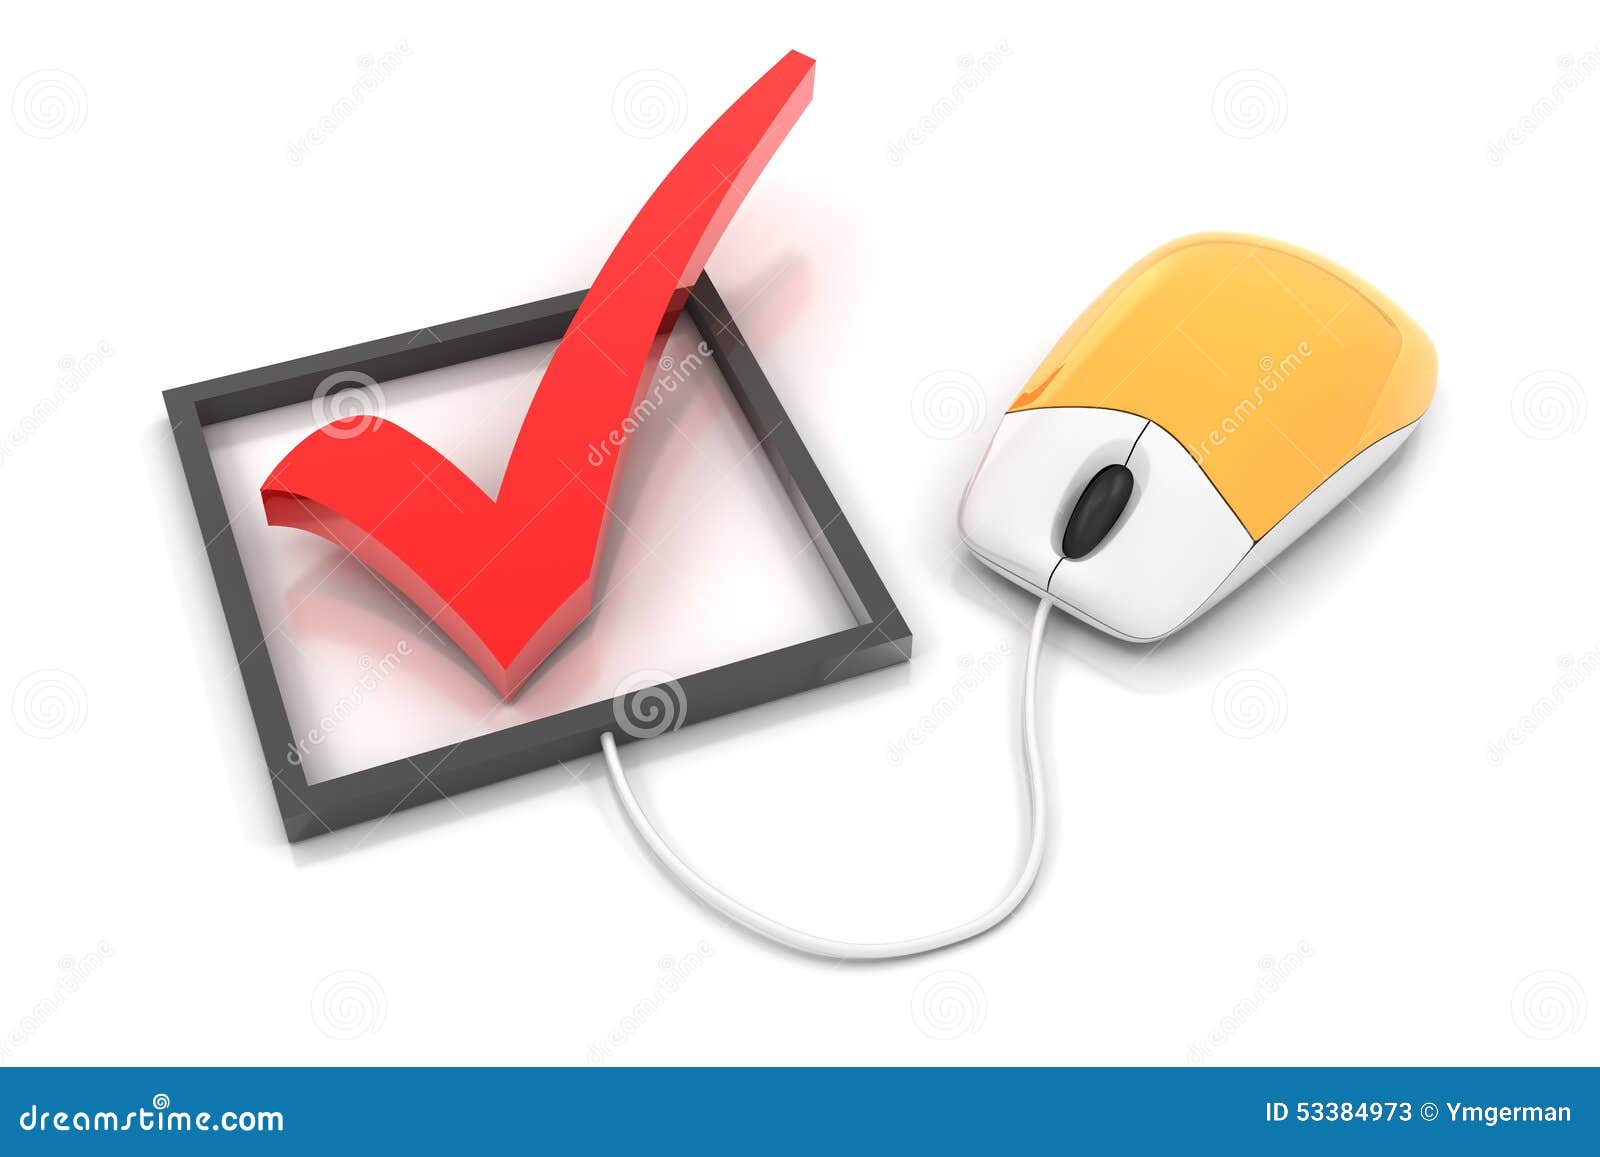 checkbox with computer mouse, 3d render